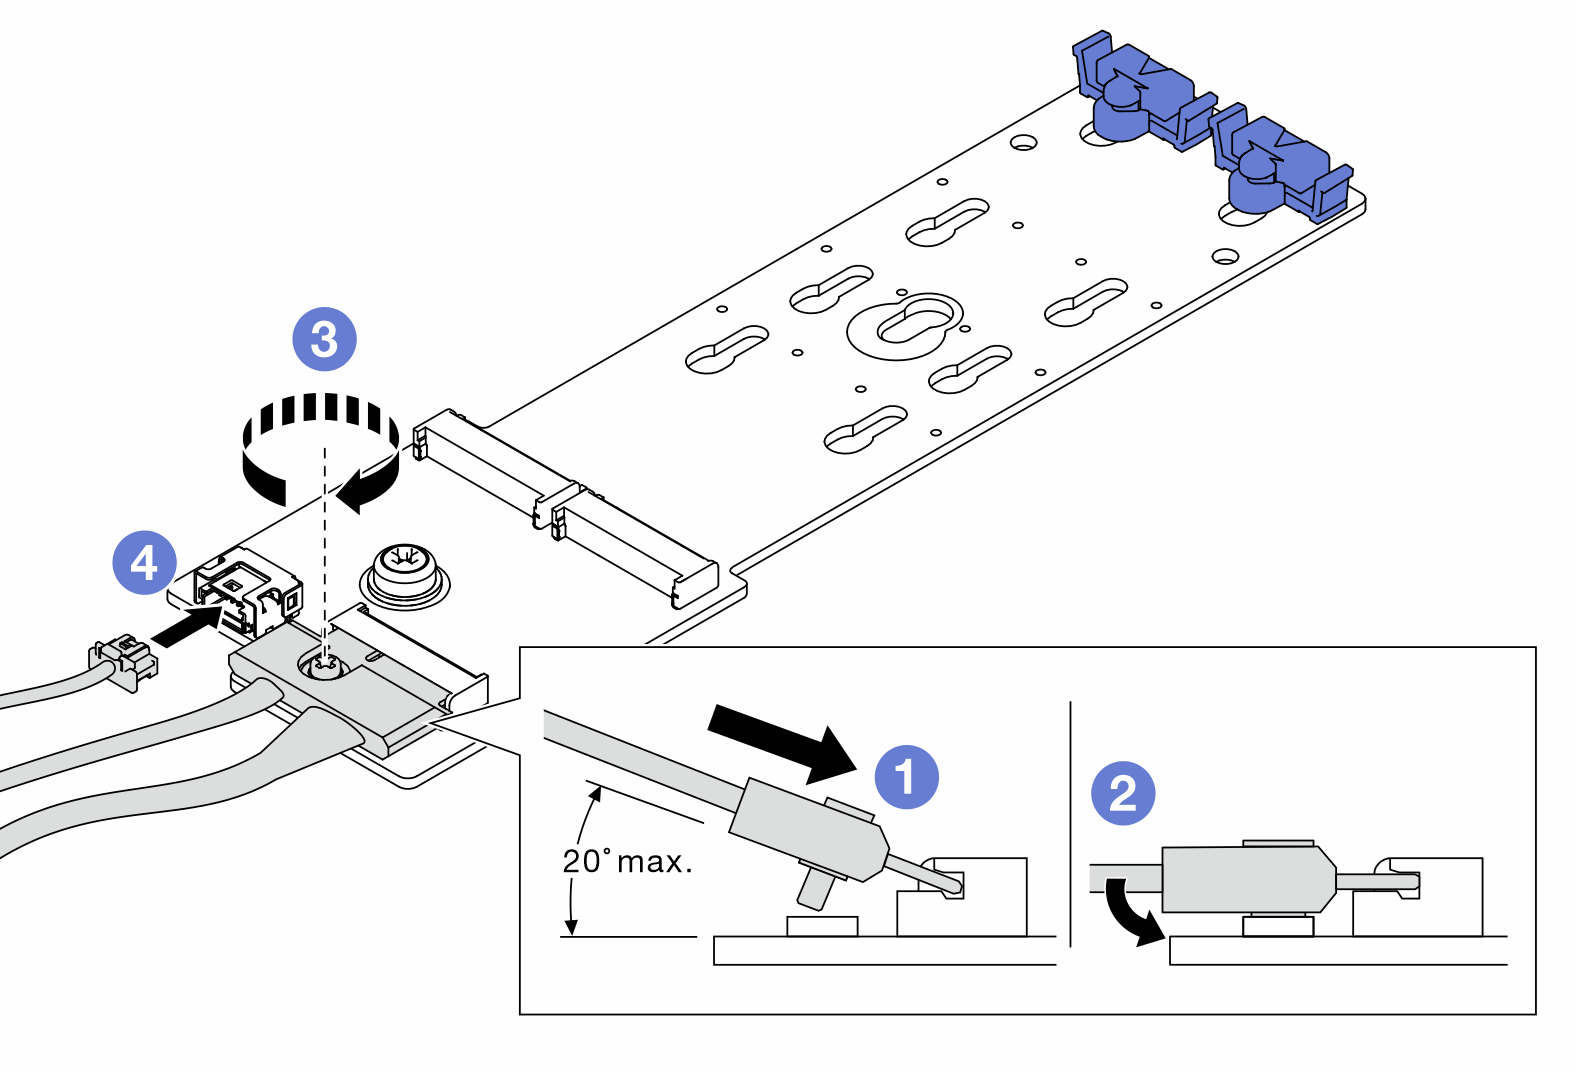 Connecting M.2 cables to M.2 backplane